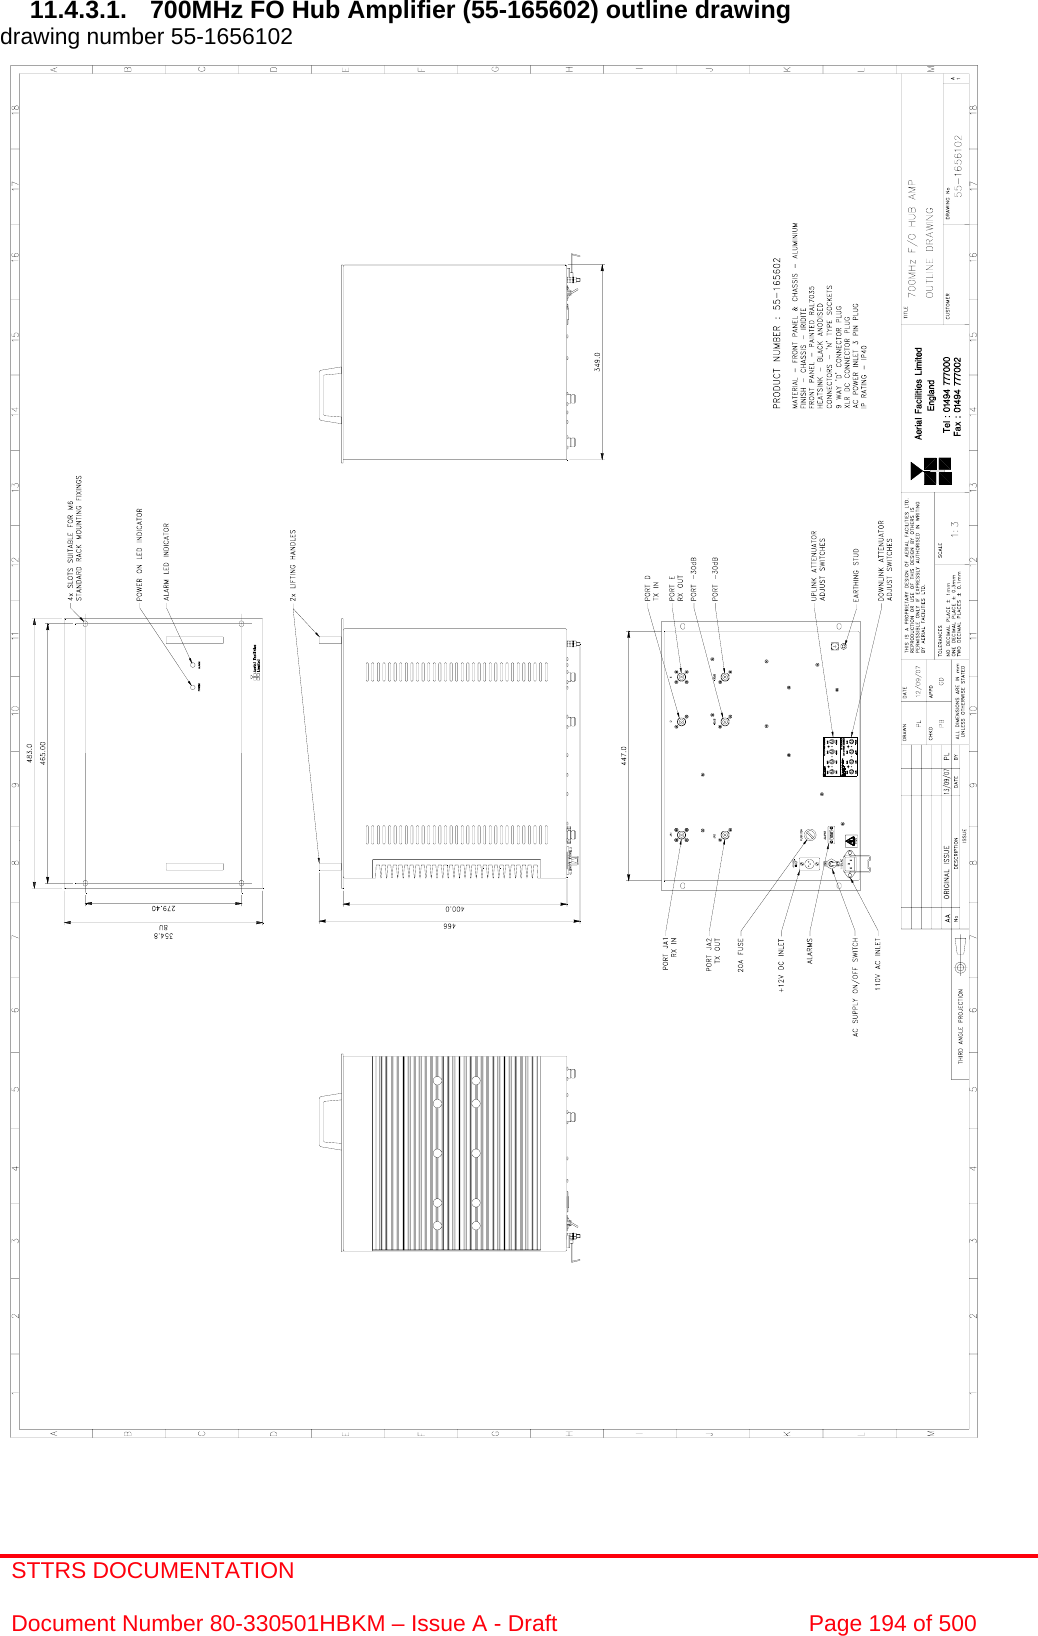 STTRS DOCUMENTATION  Document Number 80-330501HBKM – Issue A - Draft  Page 194 of 500   11.4.3.1.  700MHz FO Hub Amplifier (55-165602) outline drawing drawing number 55-1656102                                                  